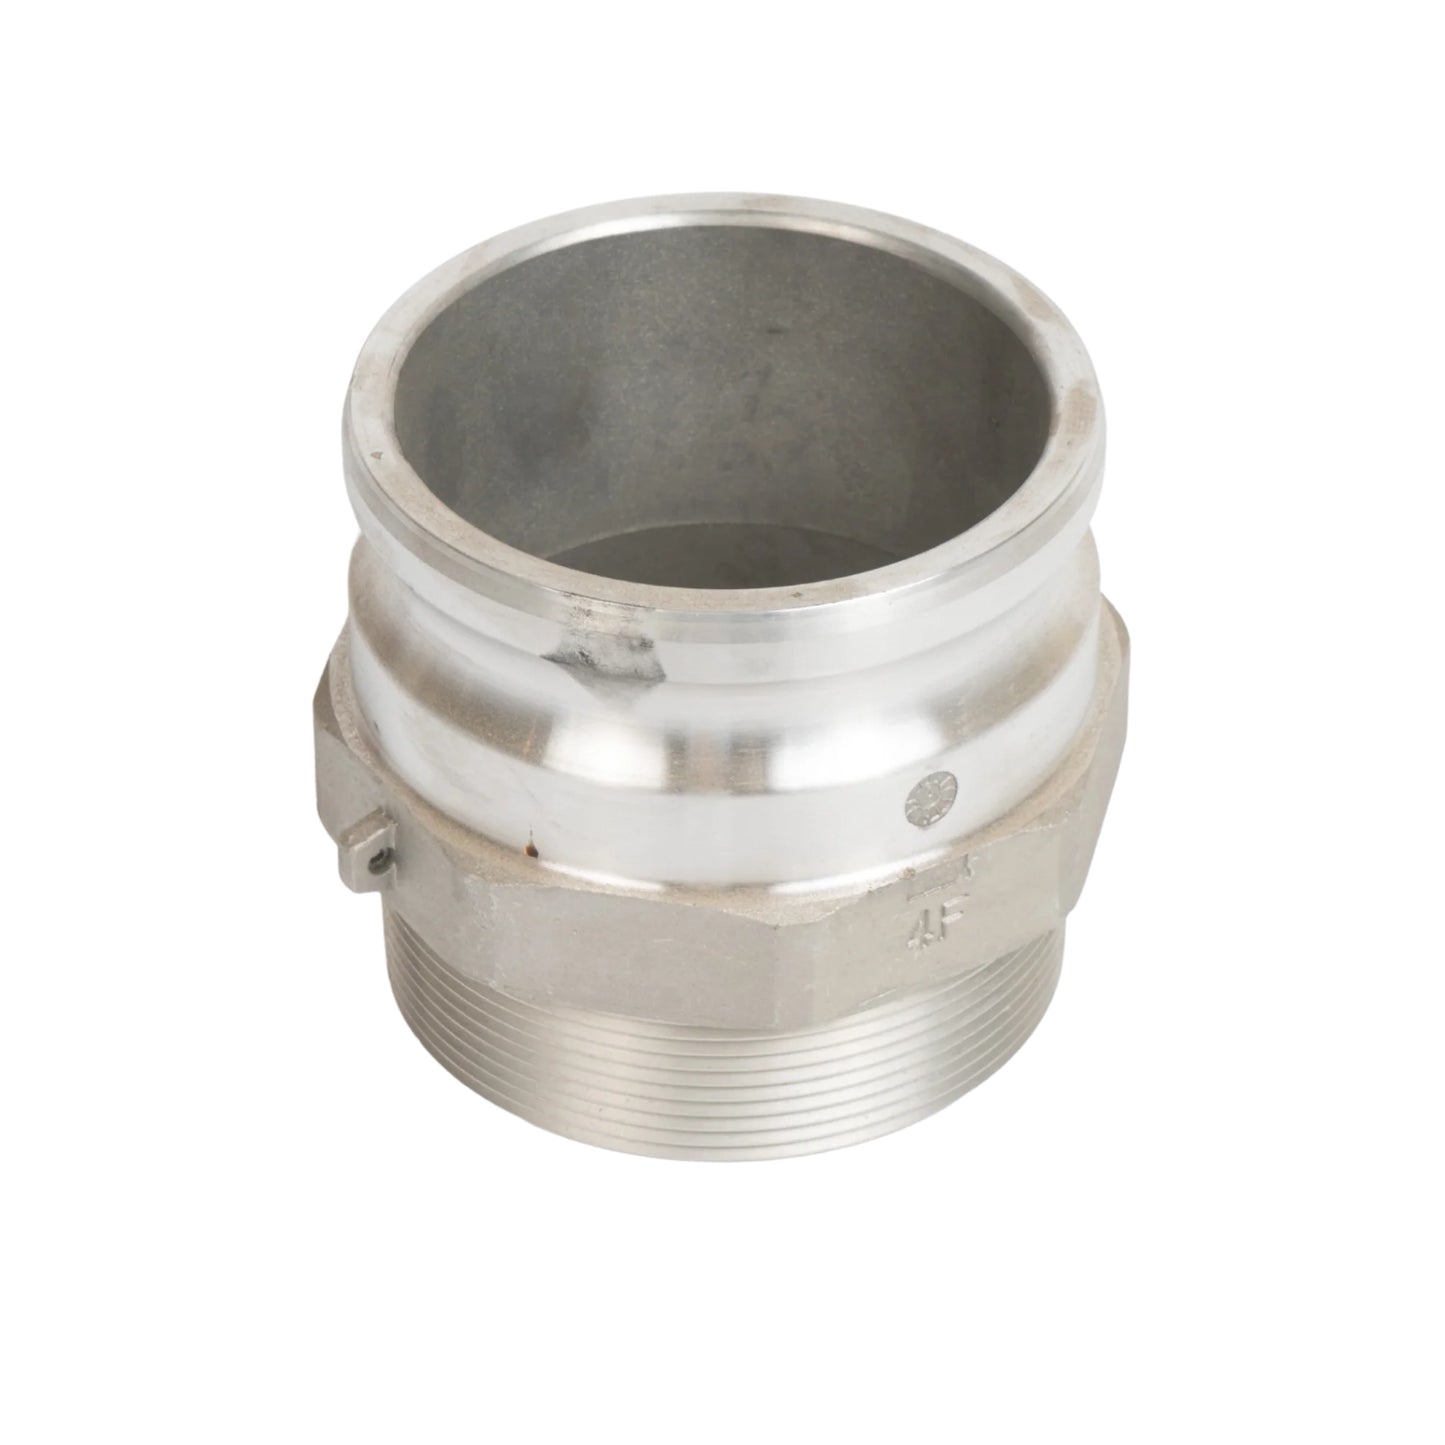 Part F 4" (Aluminum) Male Thread to Male Adapter